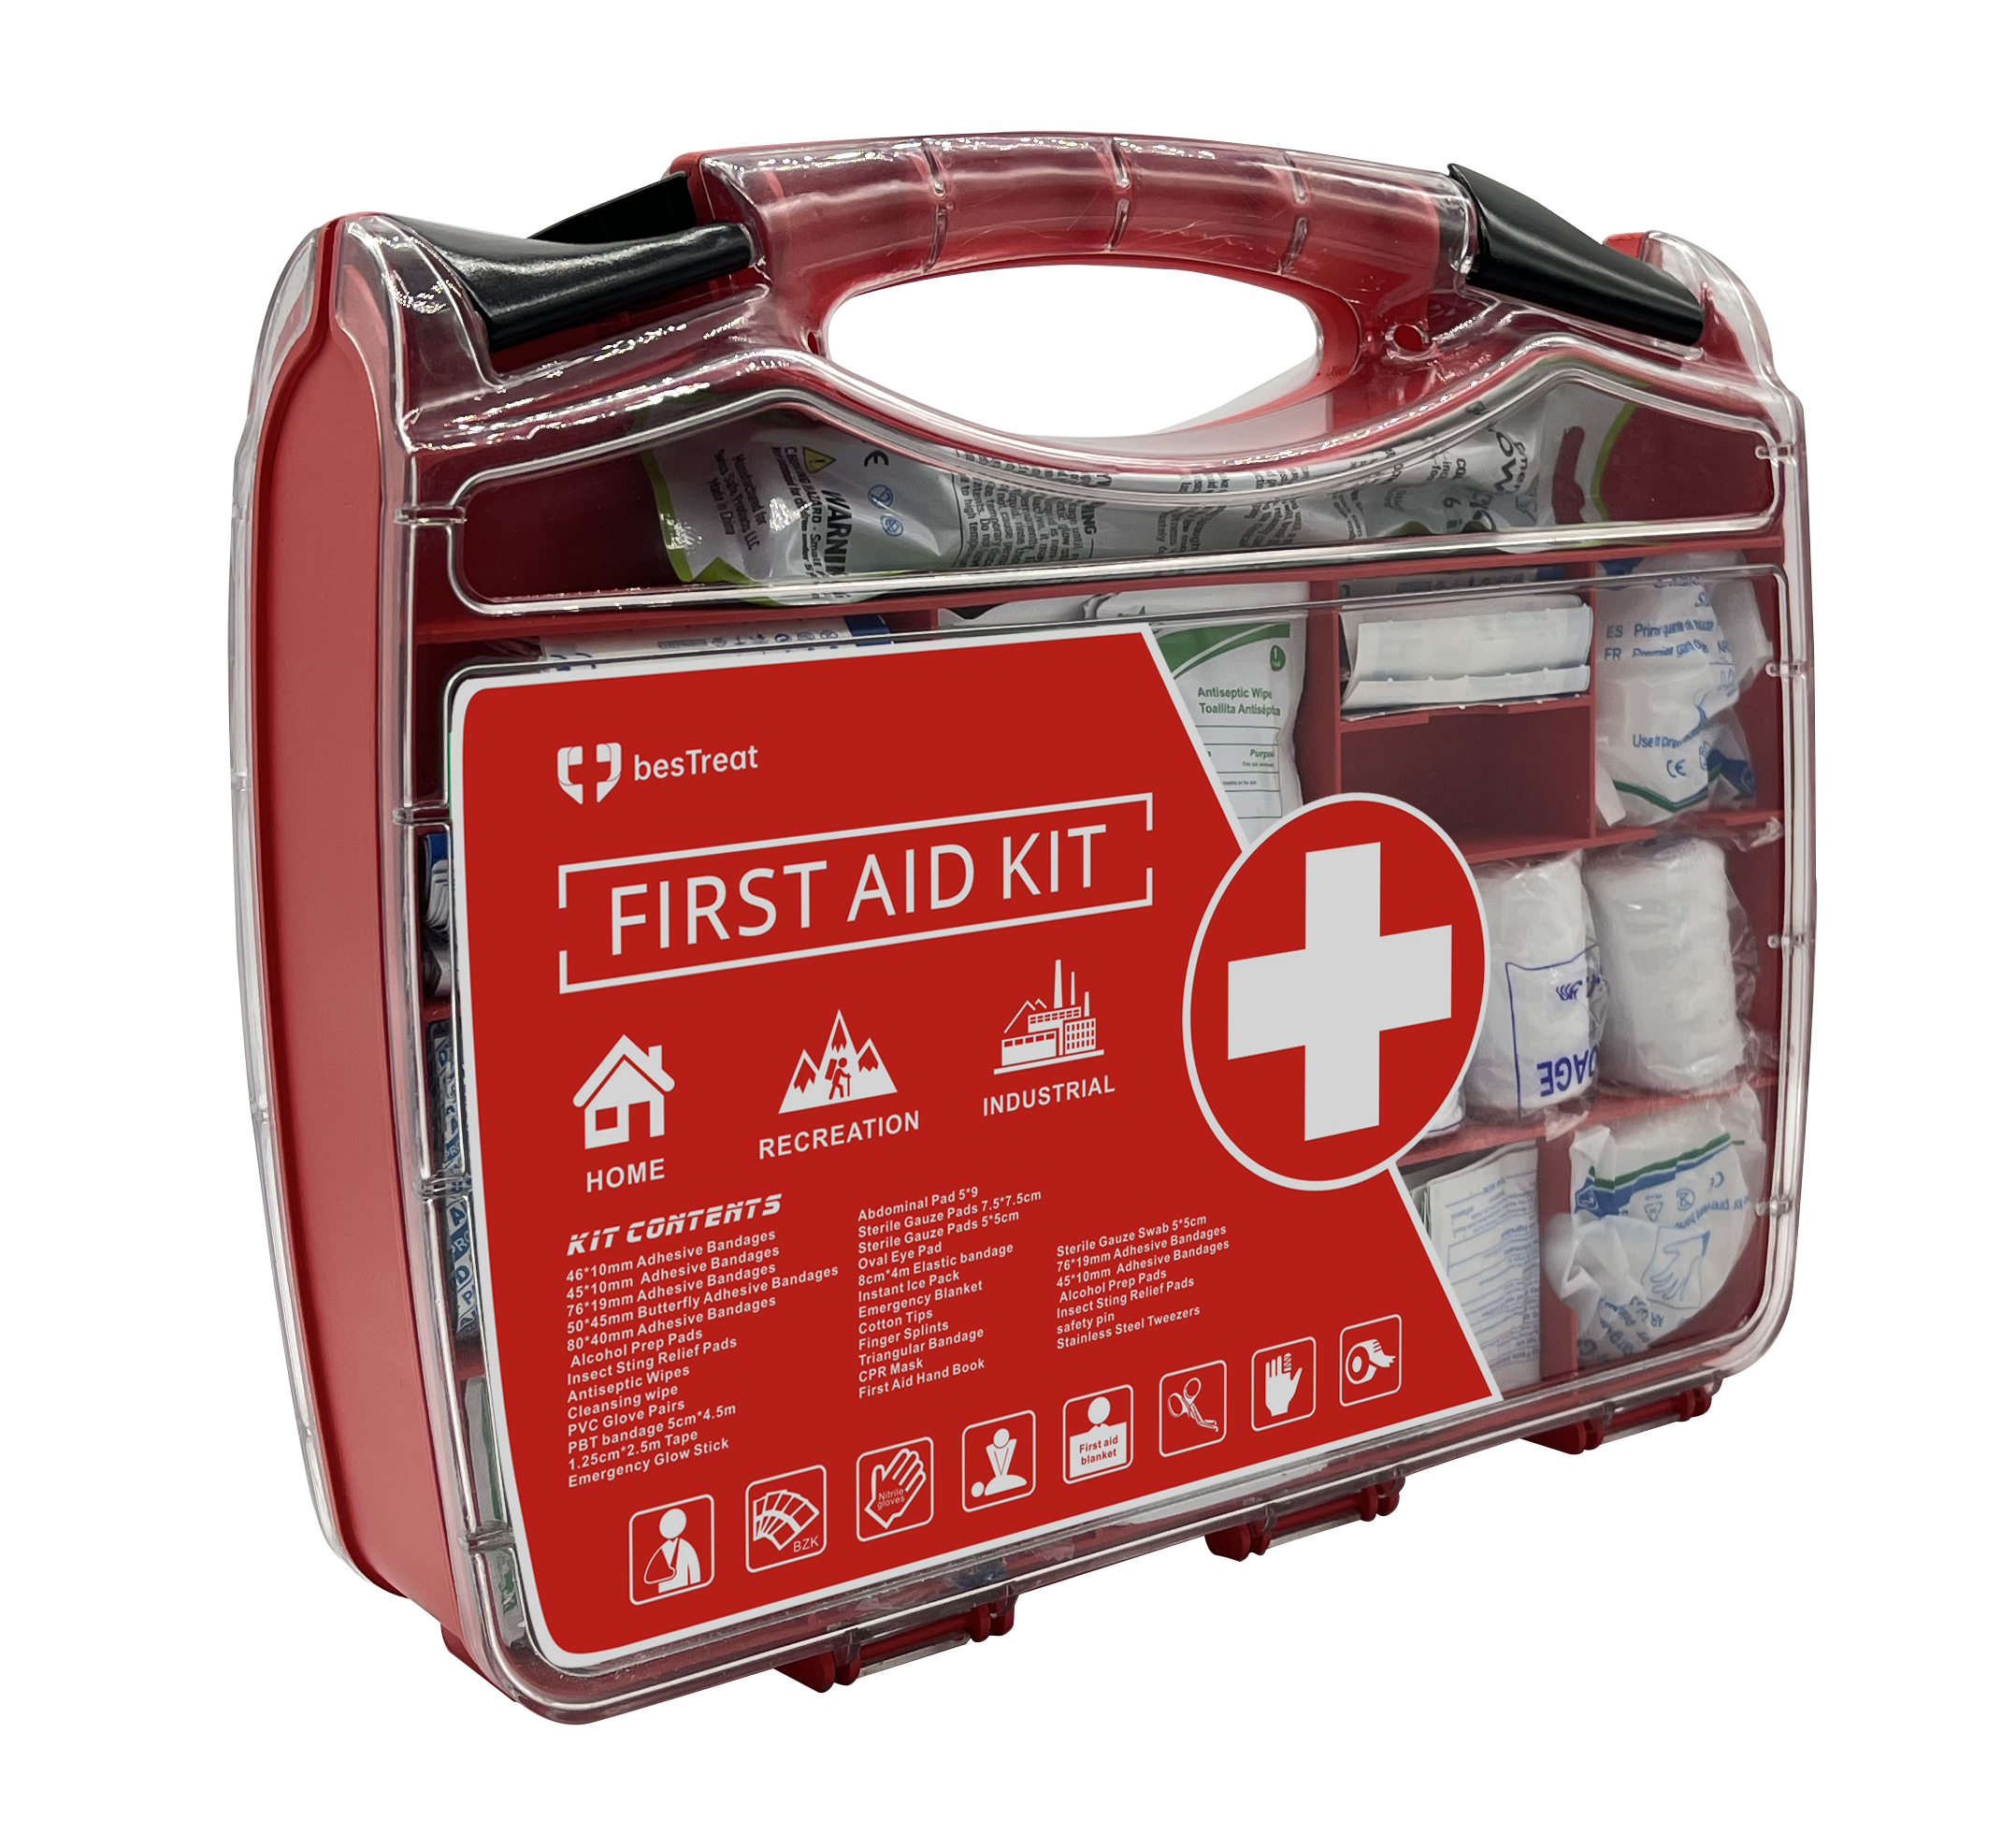 Home First Aid Kit ，first aid box for home